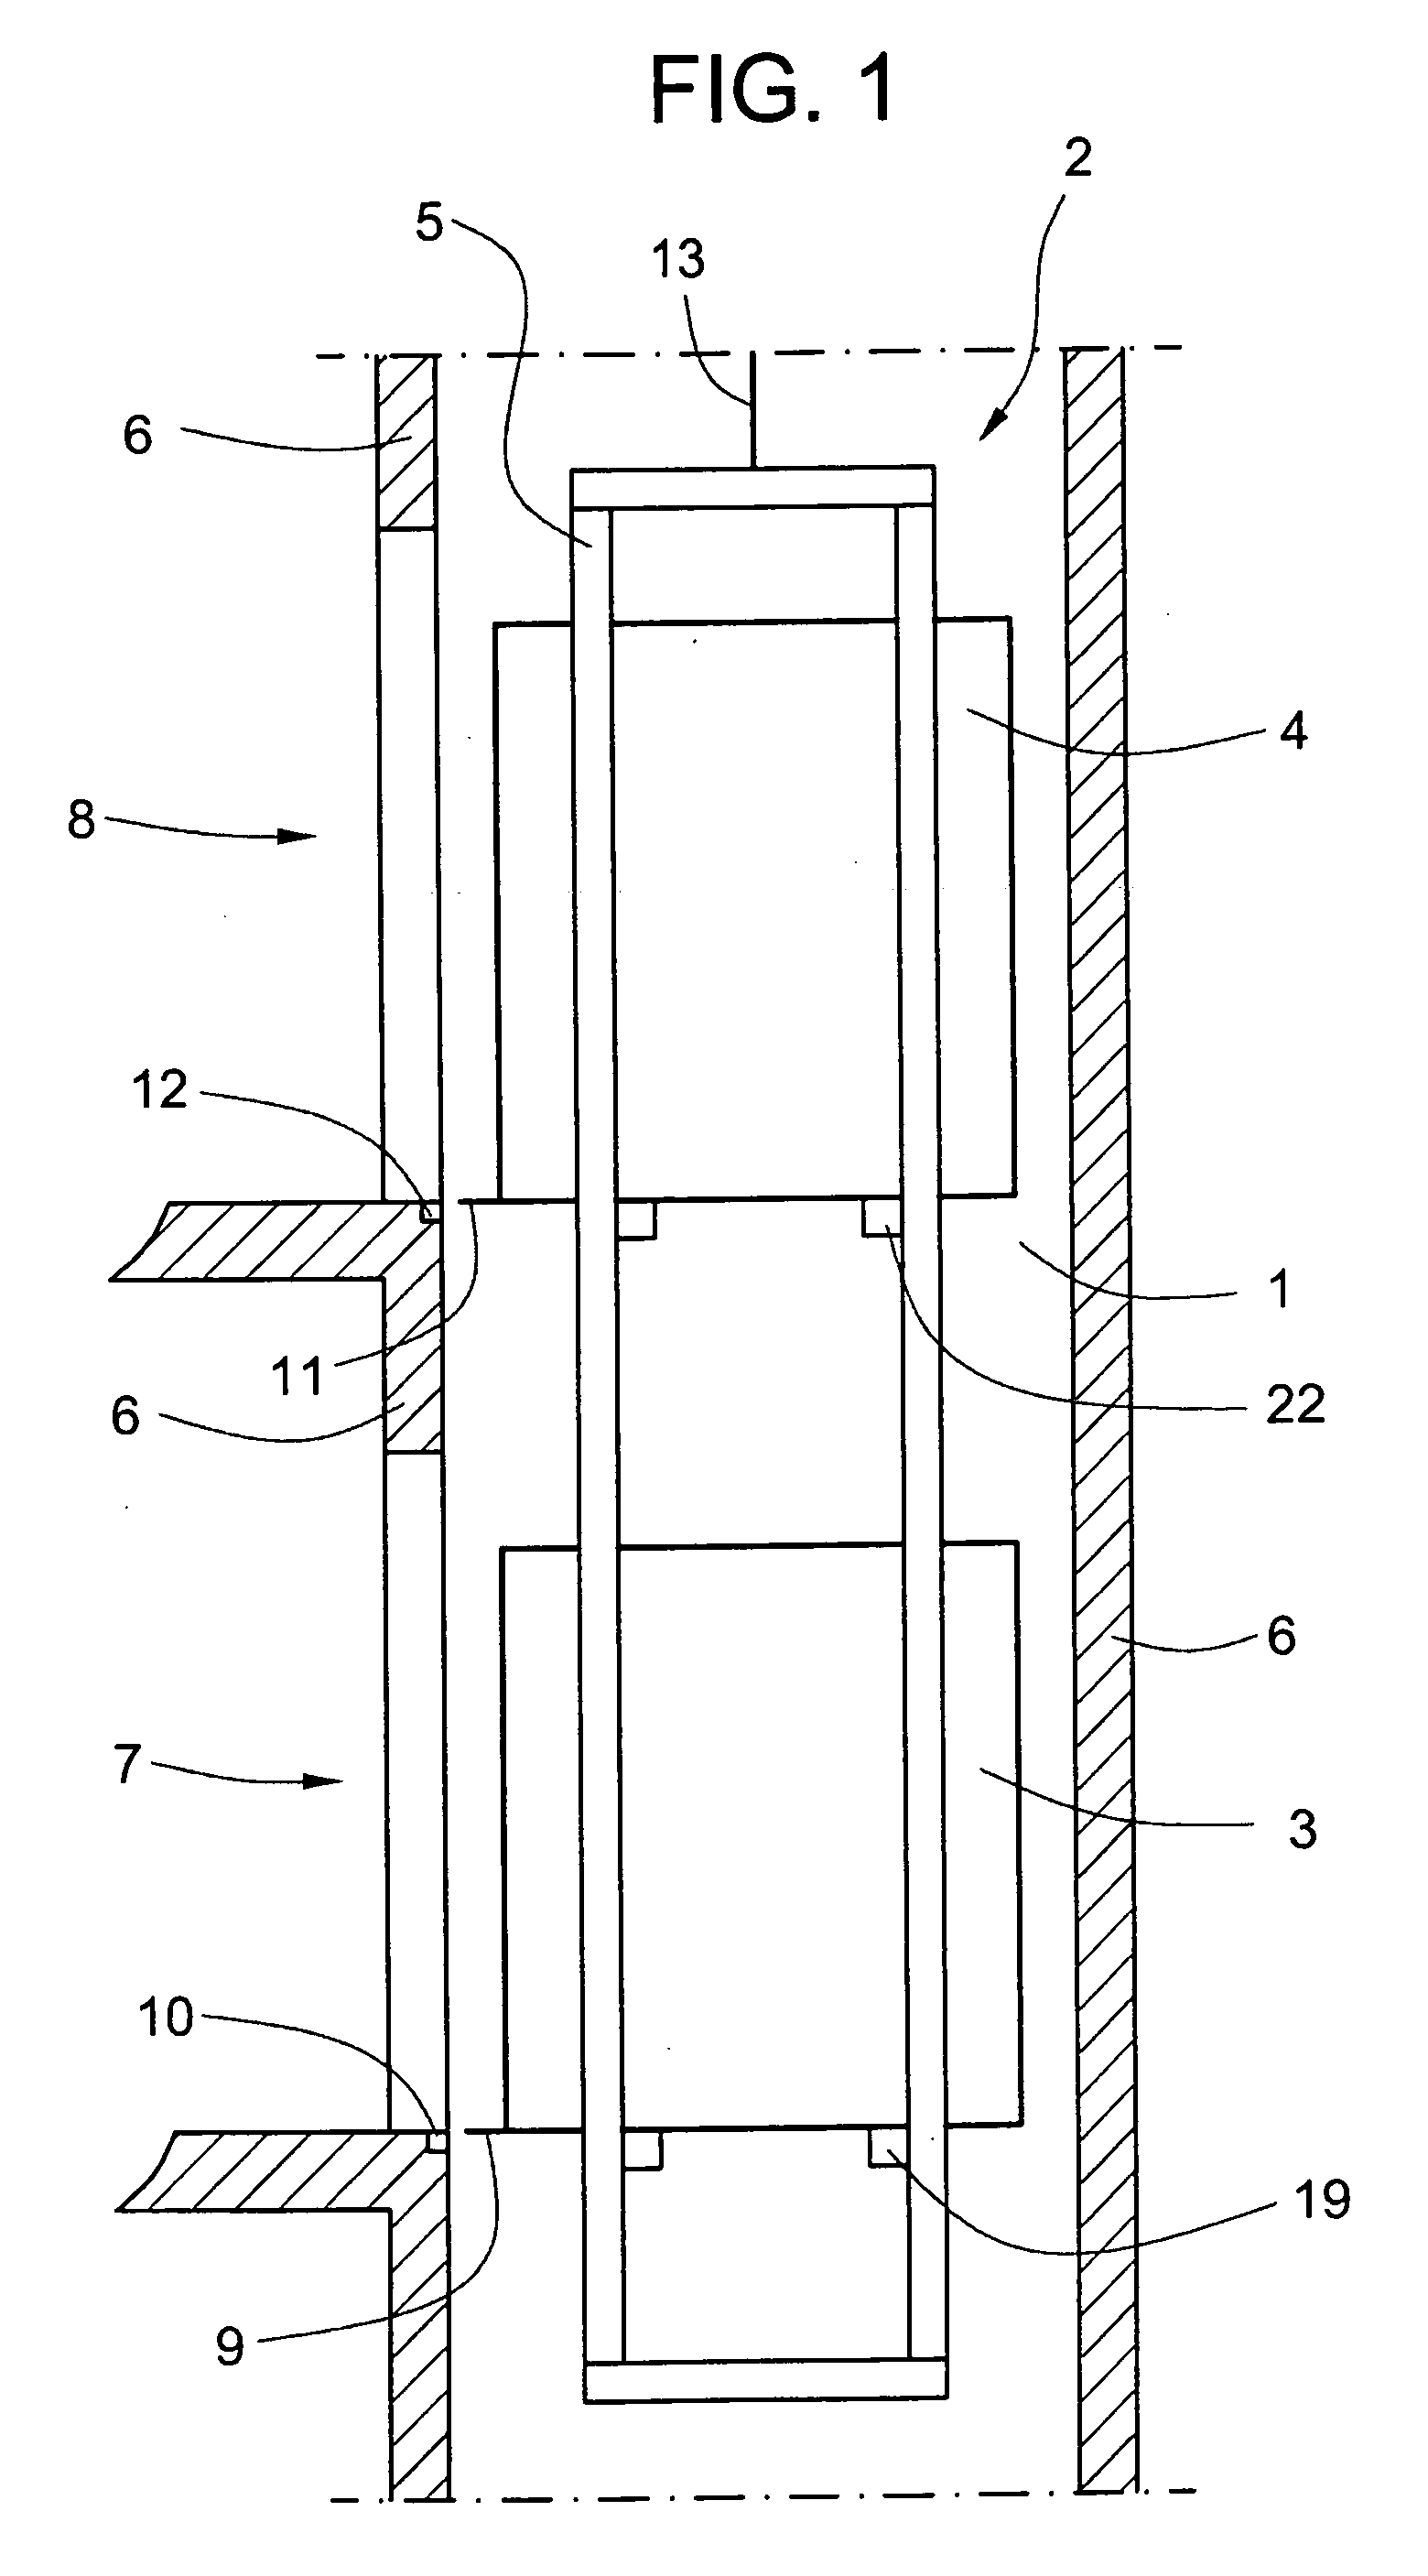 Equipment for fine positioning of the cars of a multi-stage car for an elevator